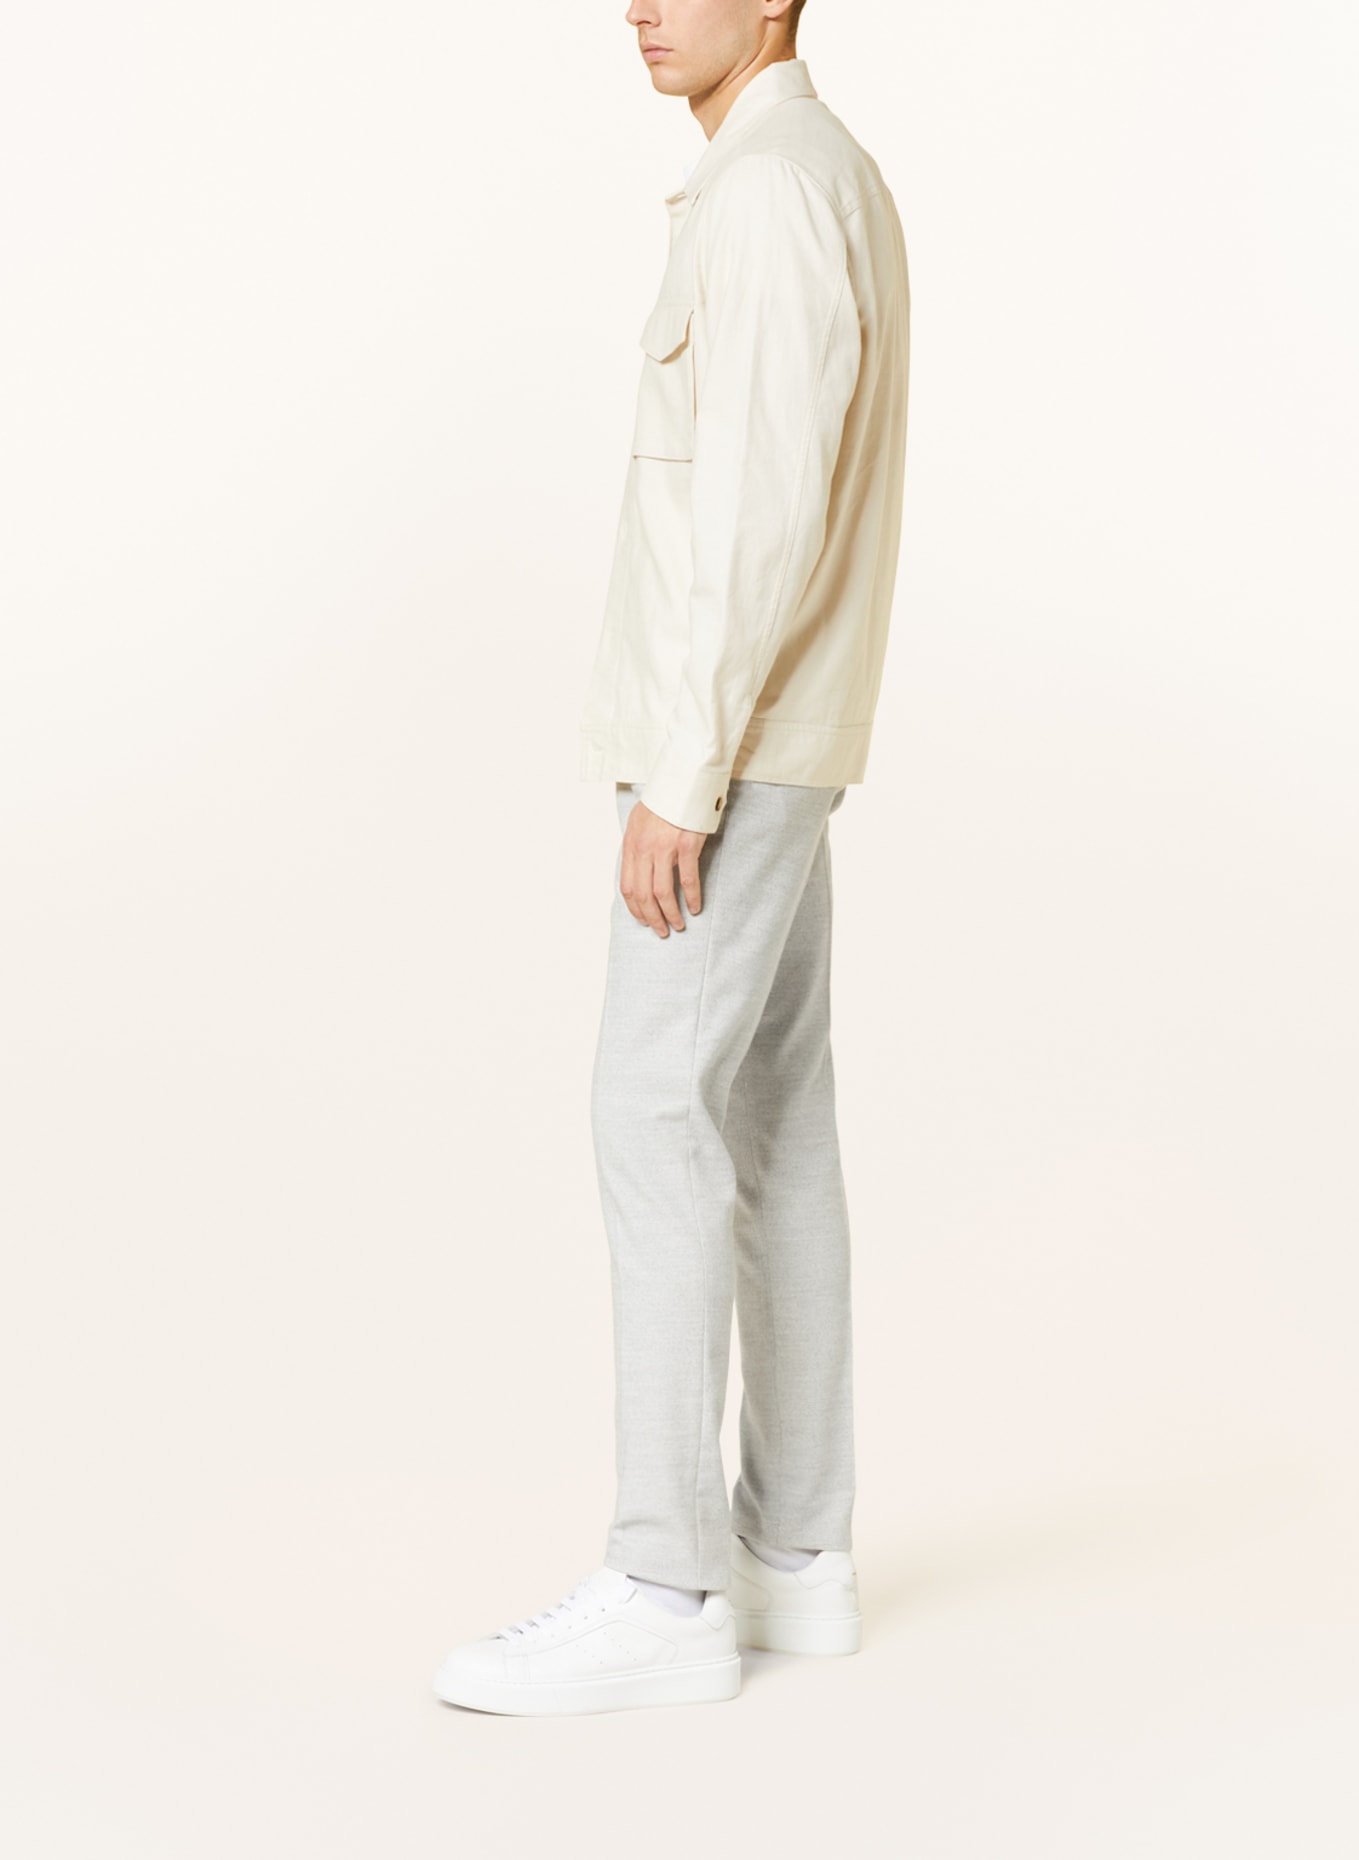 PROFUOMO Pants in jogger style, Color: LIGHT GRAY (Image 4)